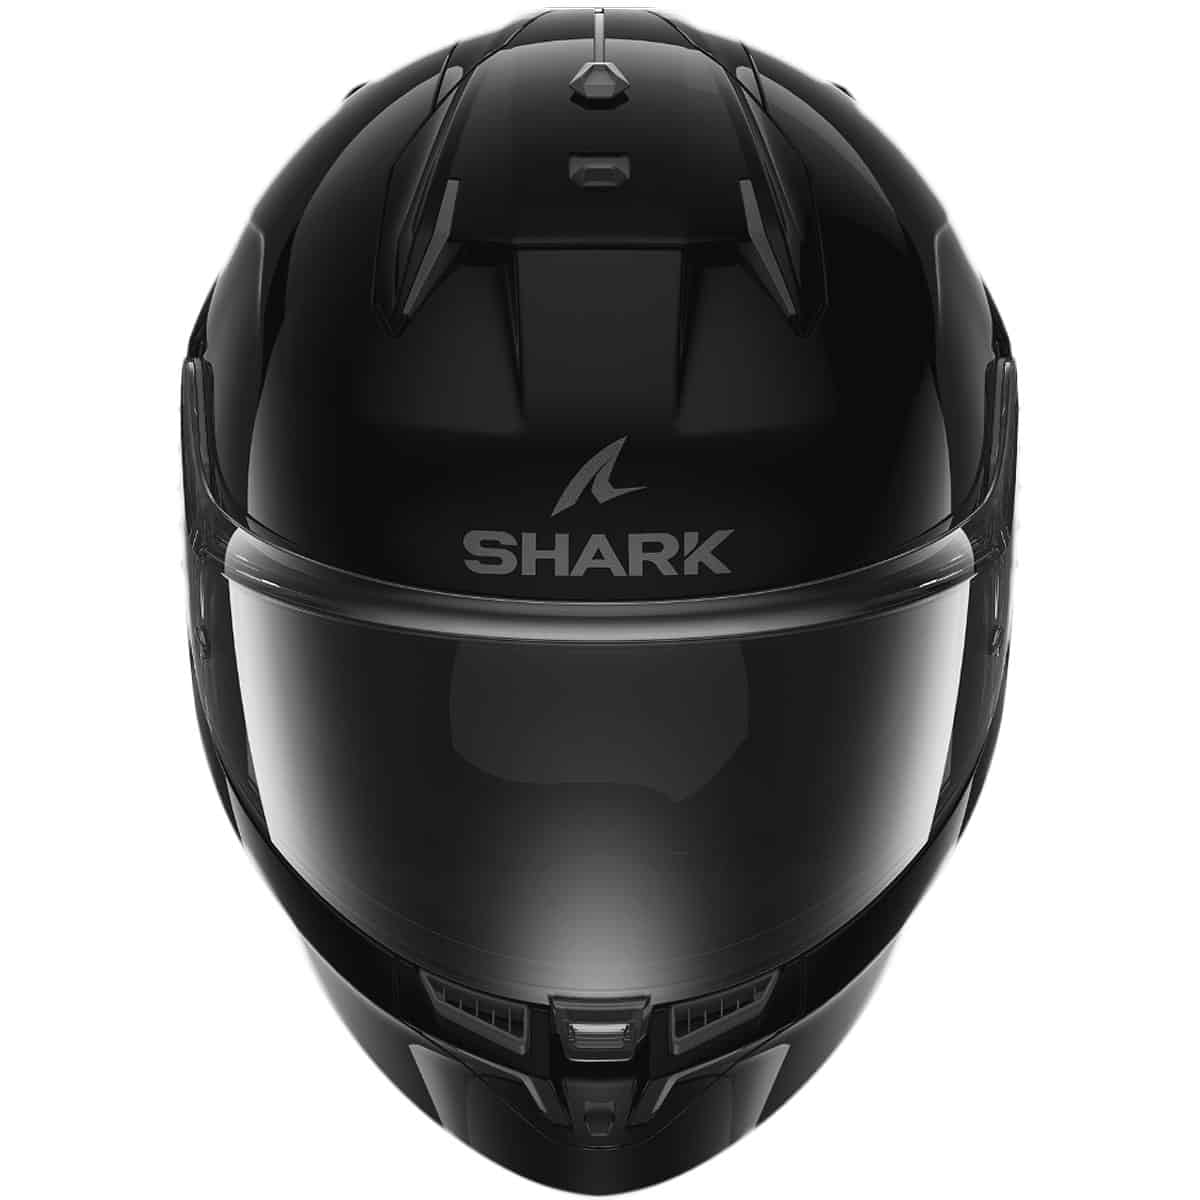 In this price class the Shark D-Skwal 3 offers one of the best interior fits for most head shapes, and the helmet has all the details that make a difference day-to-day - front